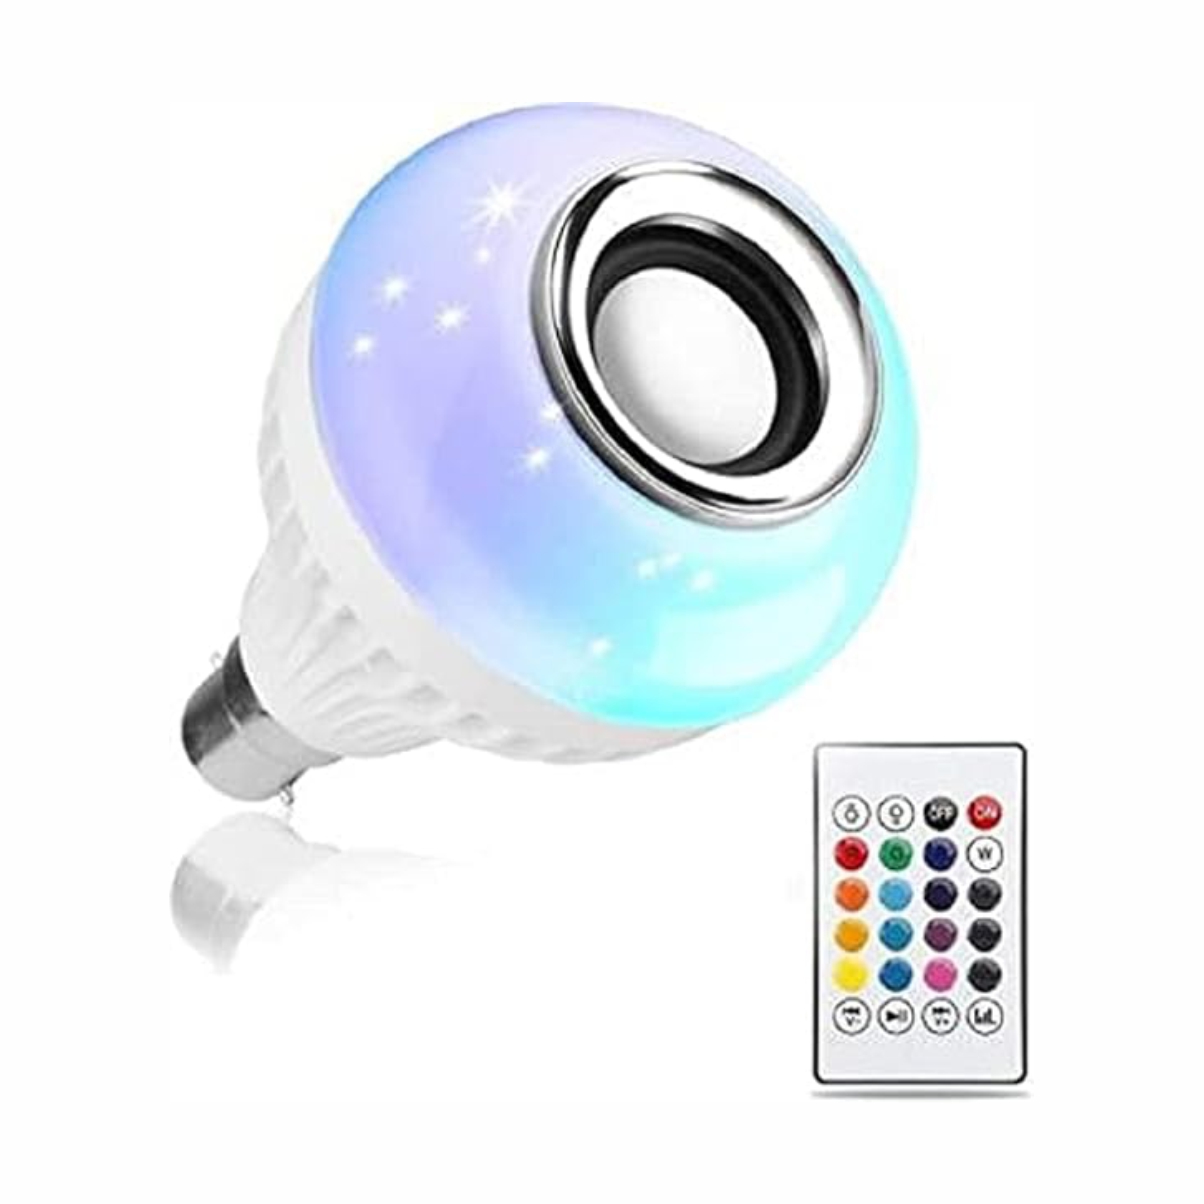 Multifunctional Smart LED Light Bulb with Bluetooth Speaker, Self-Changing RGB Colors for Home, Bedroom, Living Room, Party Decor